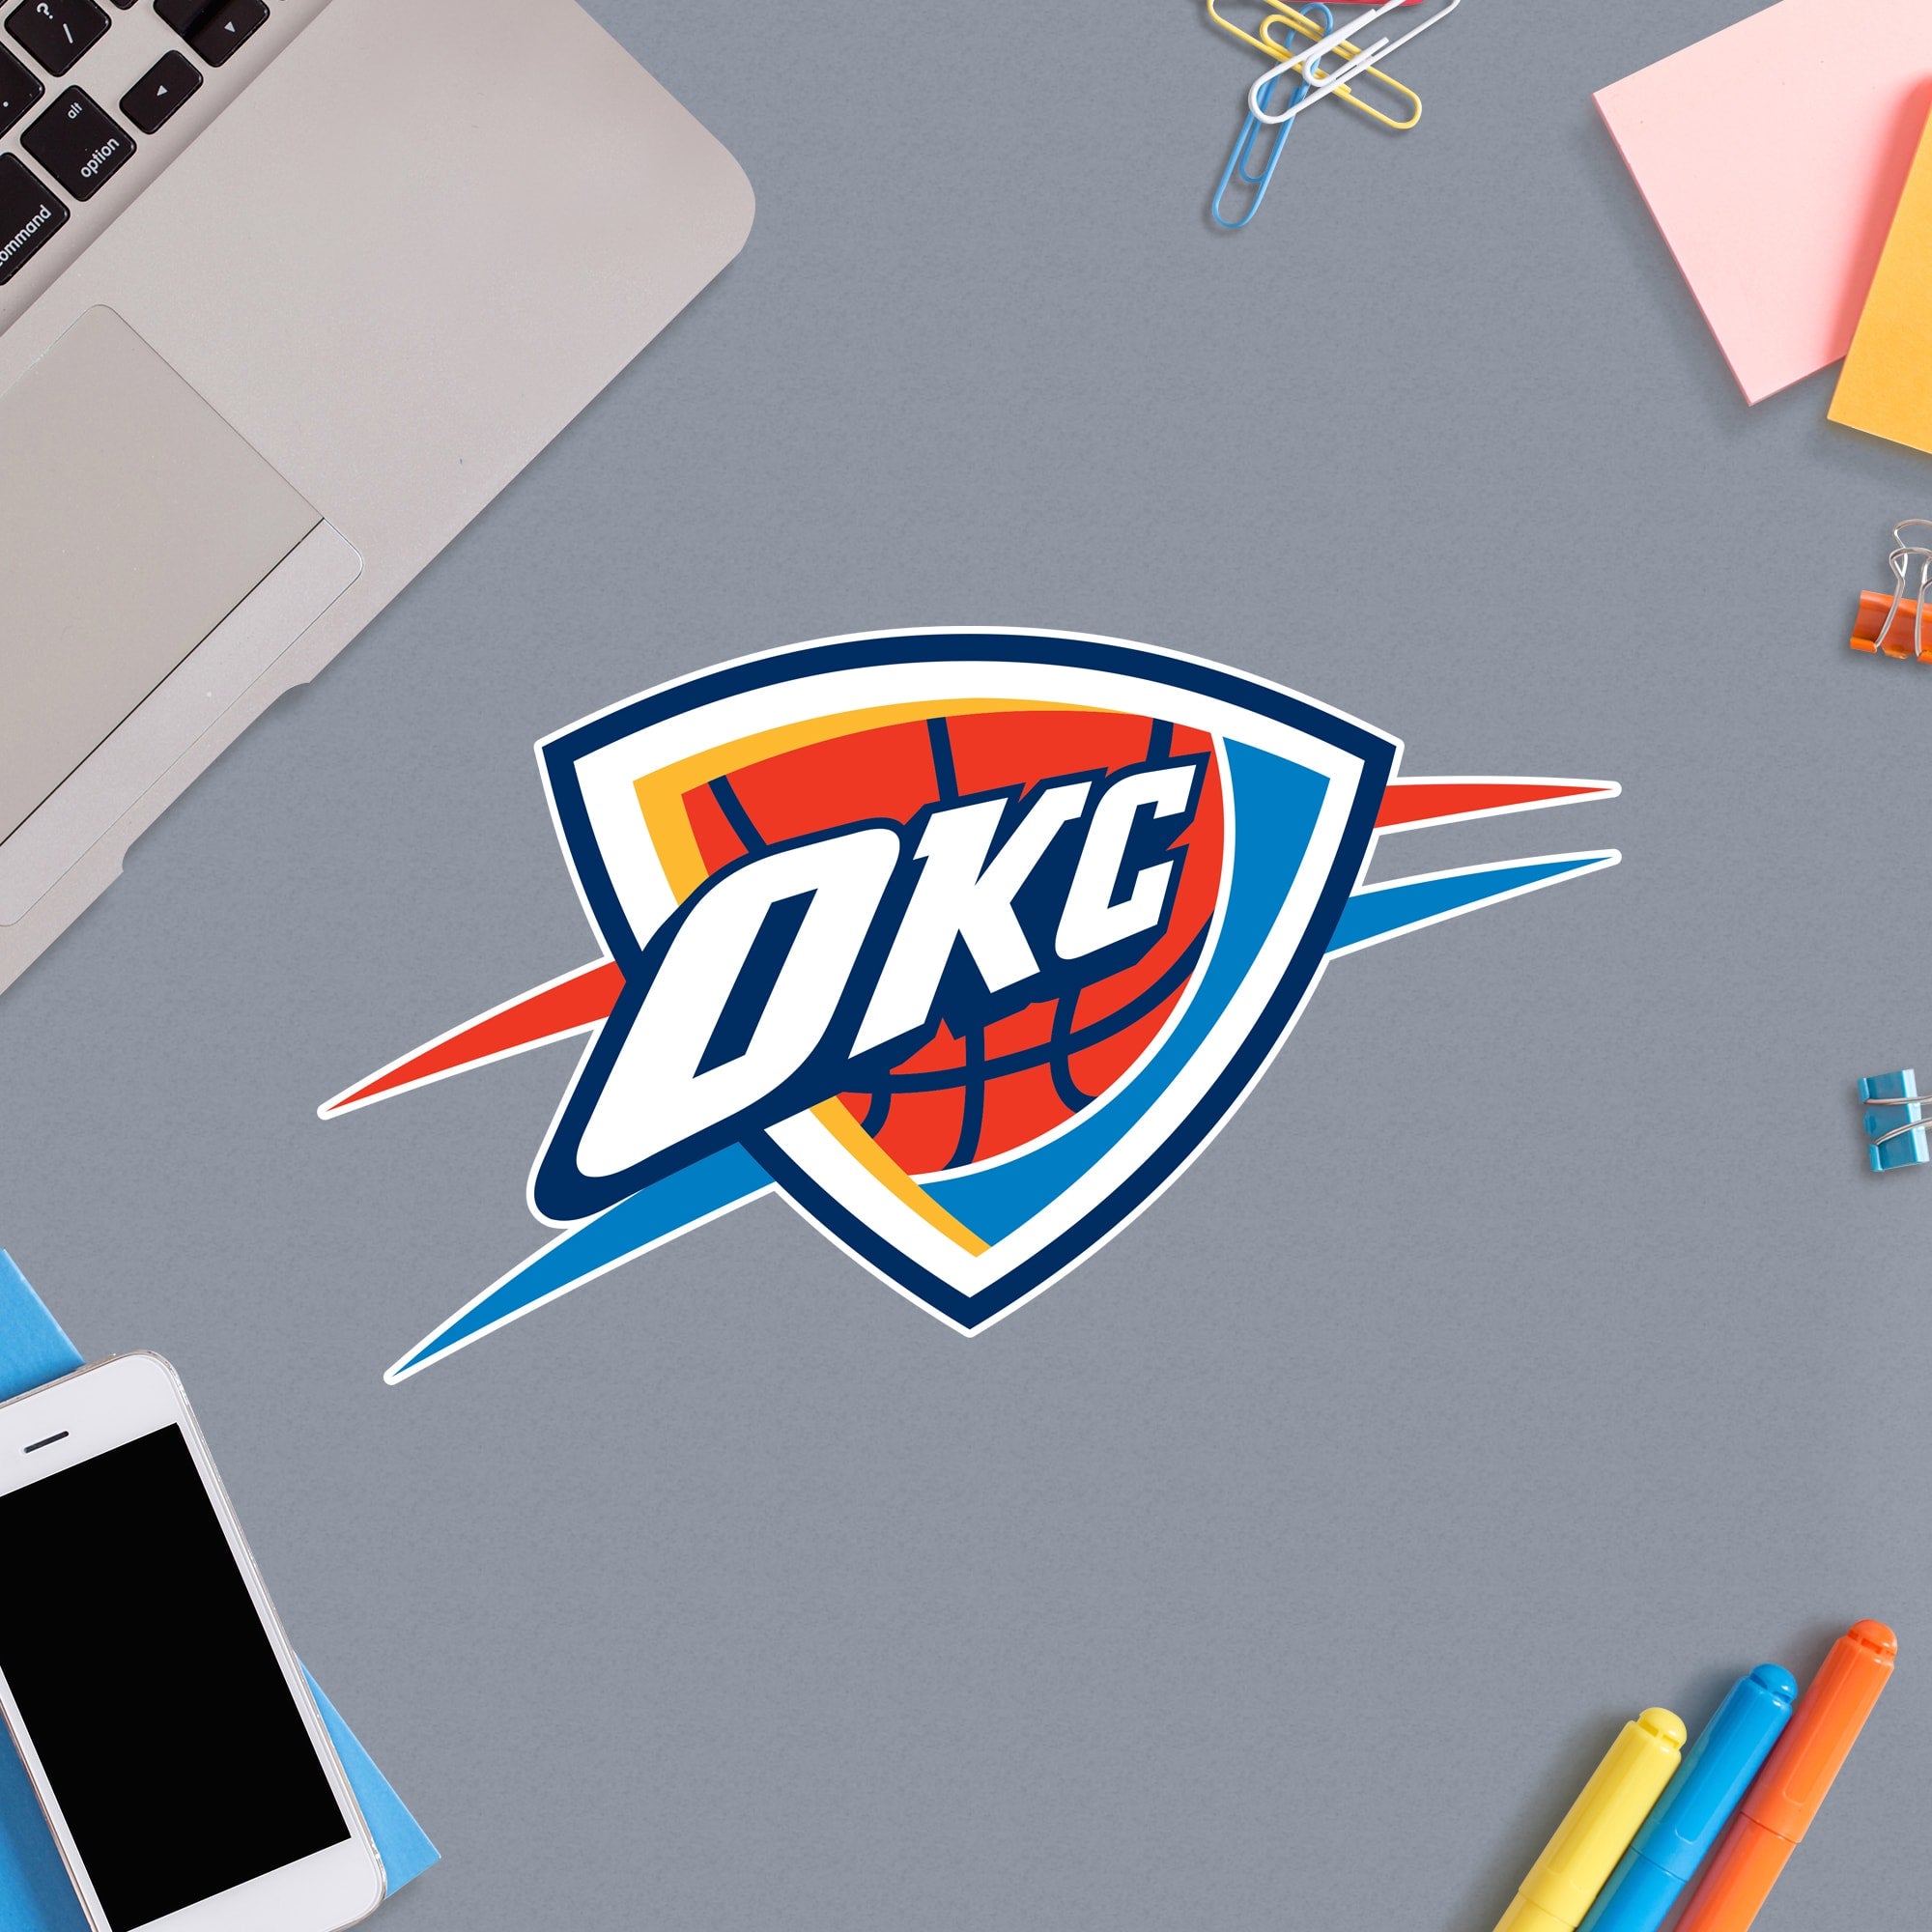 Oklahoma City Thunder: Logo - Officially Licensed NBA Removable Wall Decal Large by Fathead | Vinyl